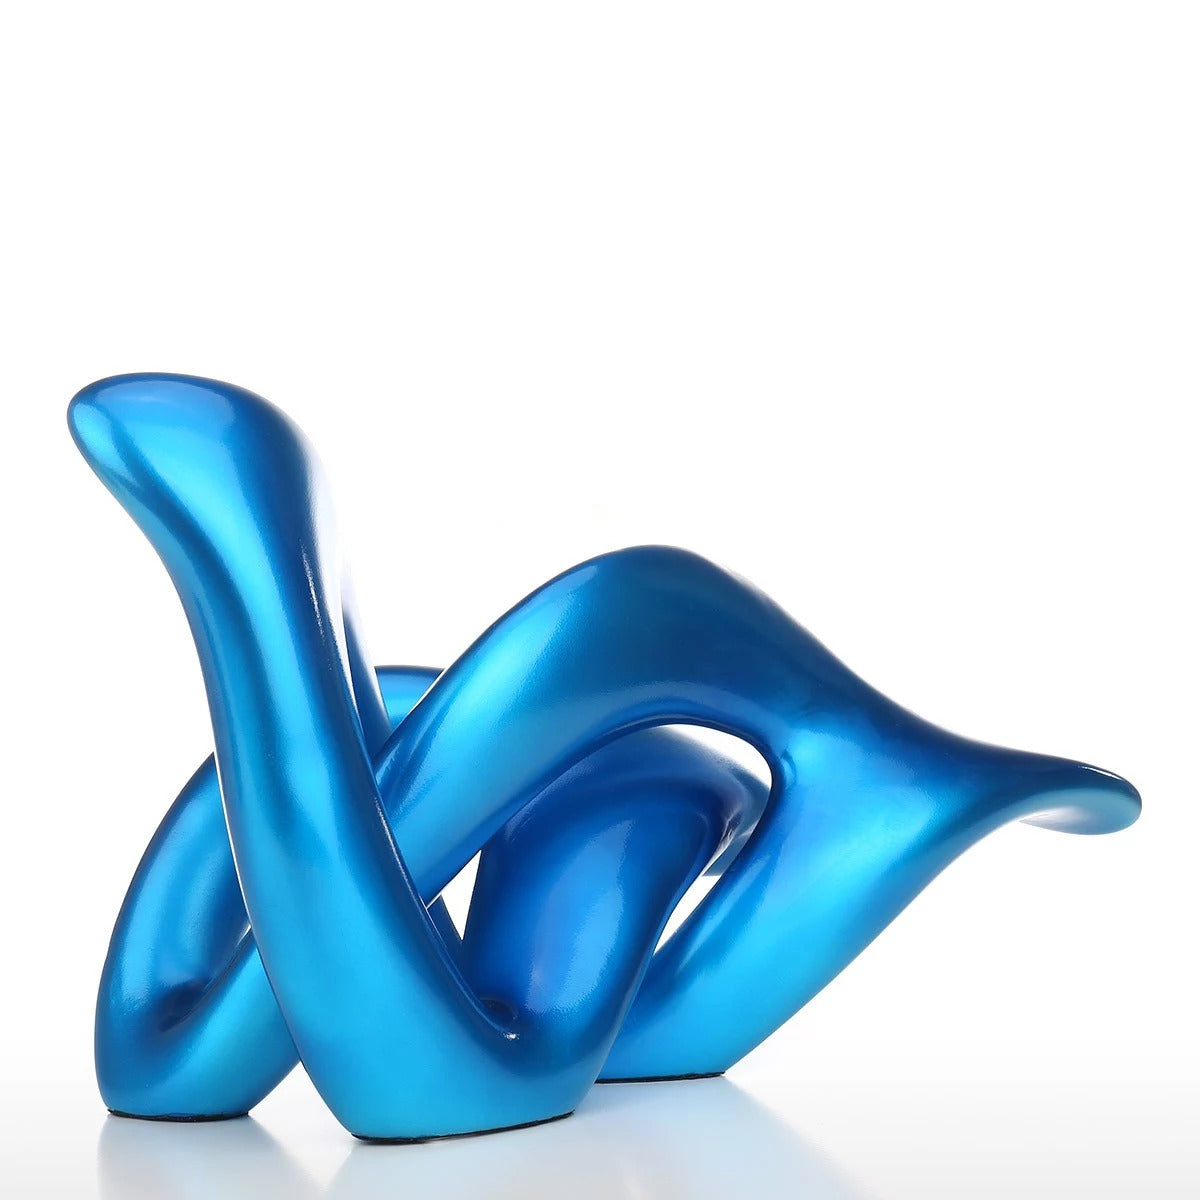 Journey to the Blue Beginning to Abstract Sculpture for Home Accessories in the Bedroom or Living Room Decor